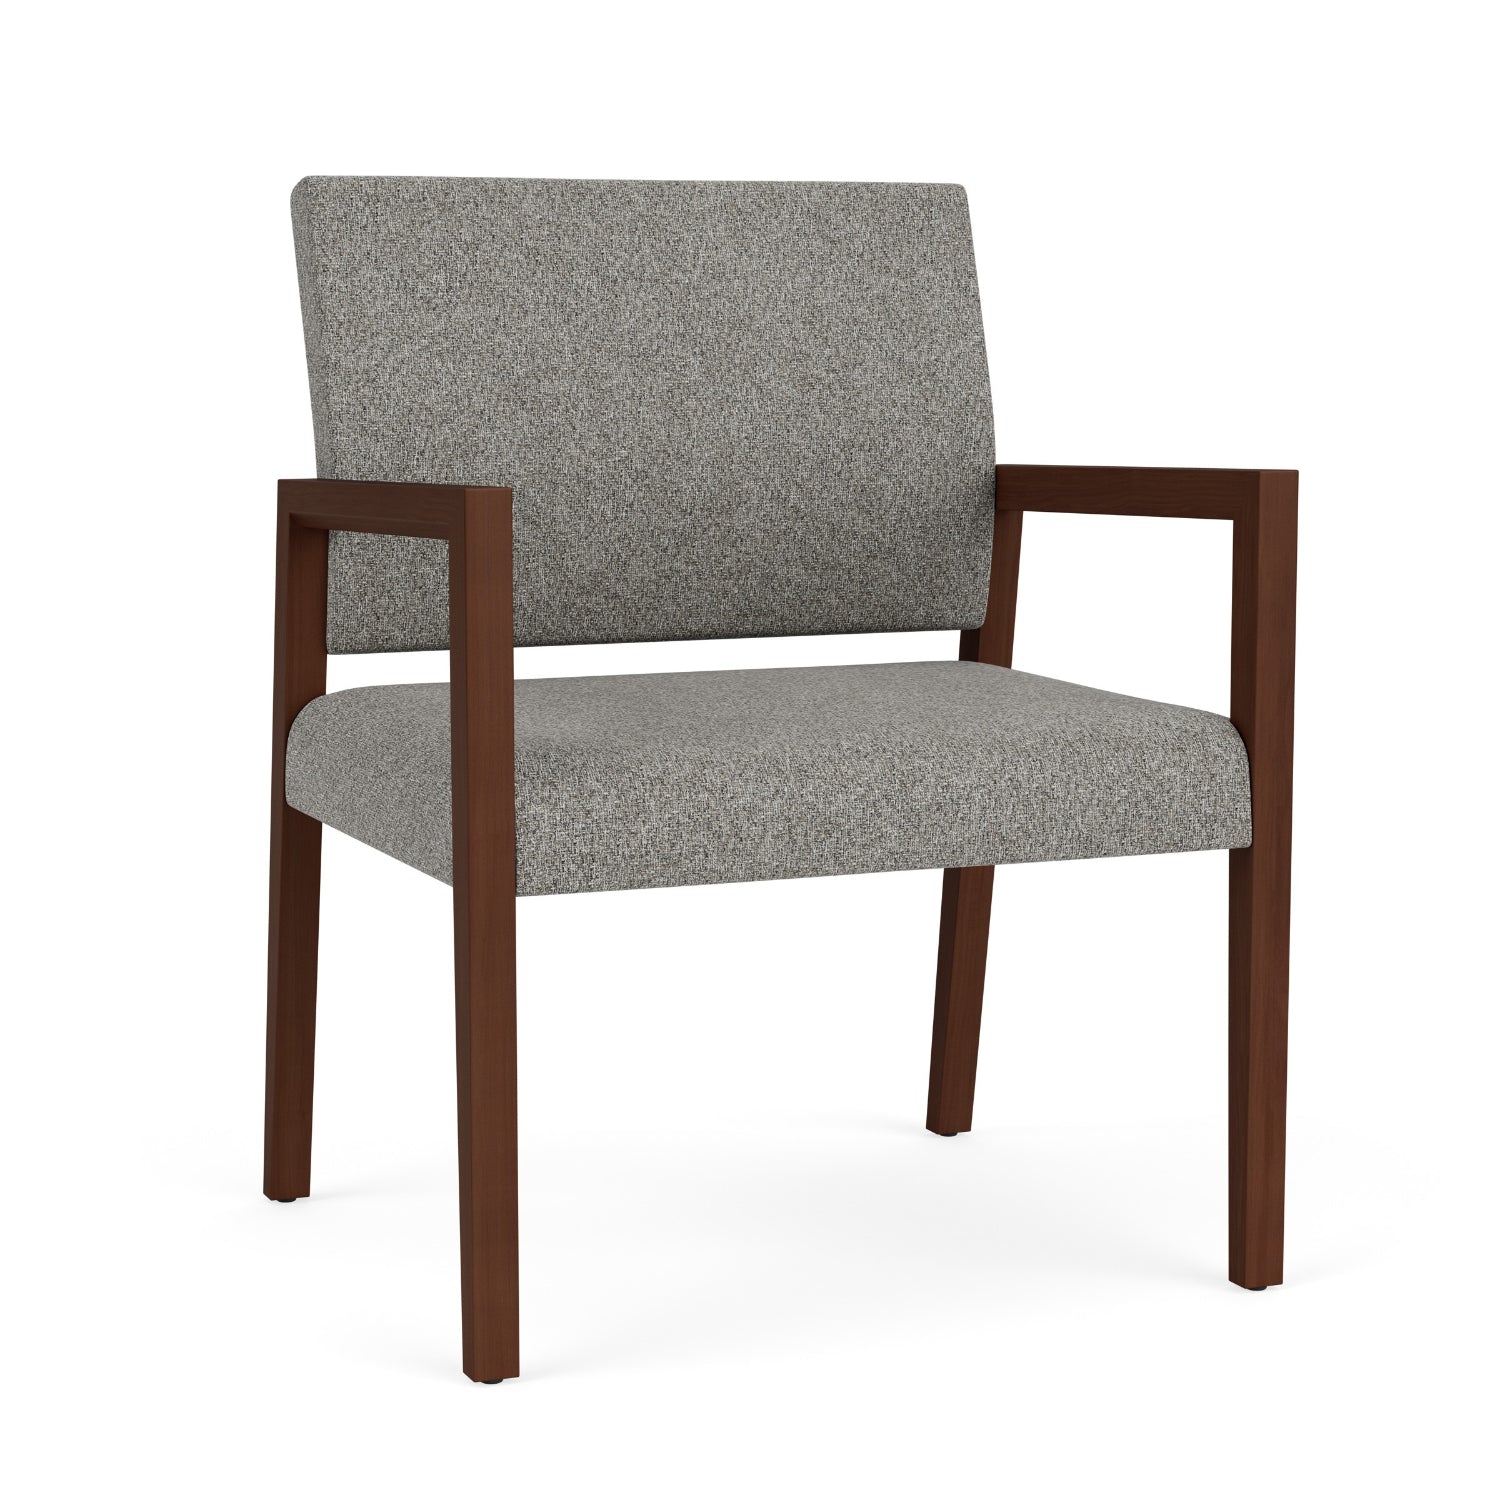 Brooklyn Collection Reception Seating, Oversize Guest Chair, 400 lb Capacity, Standard Fabric Upholstery, FREE SHIPPING